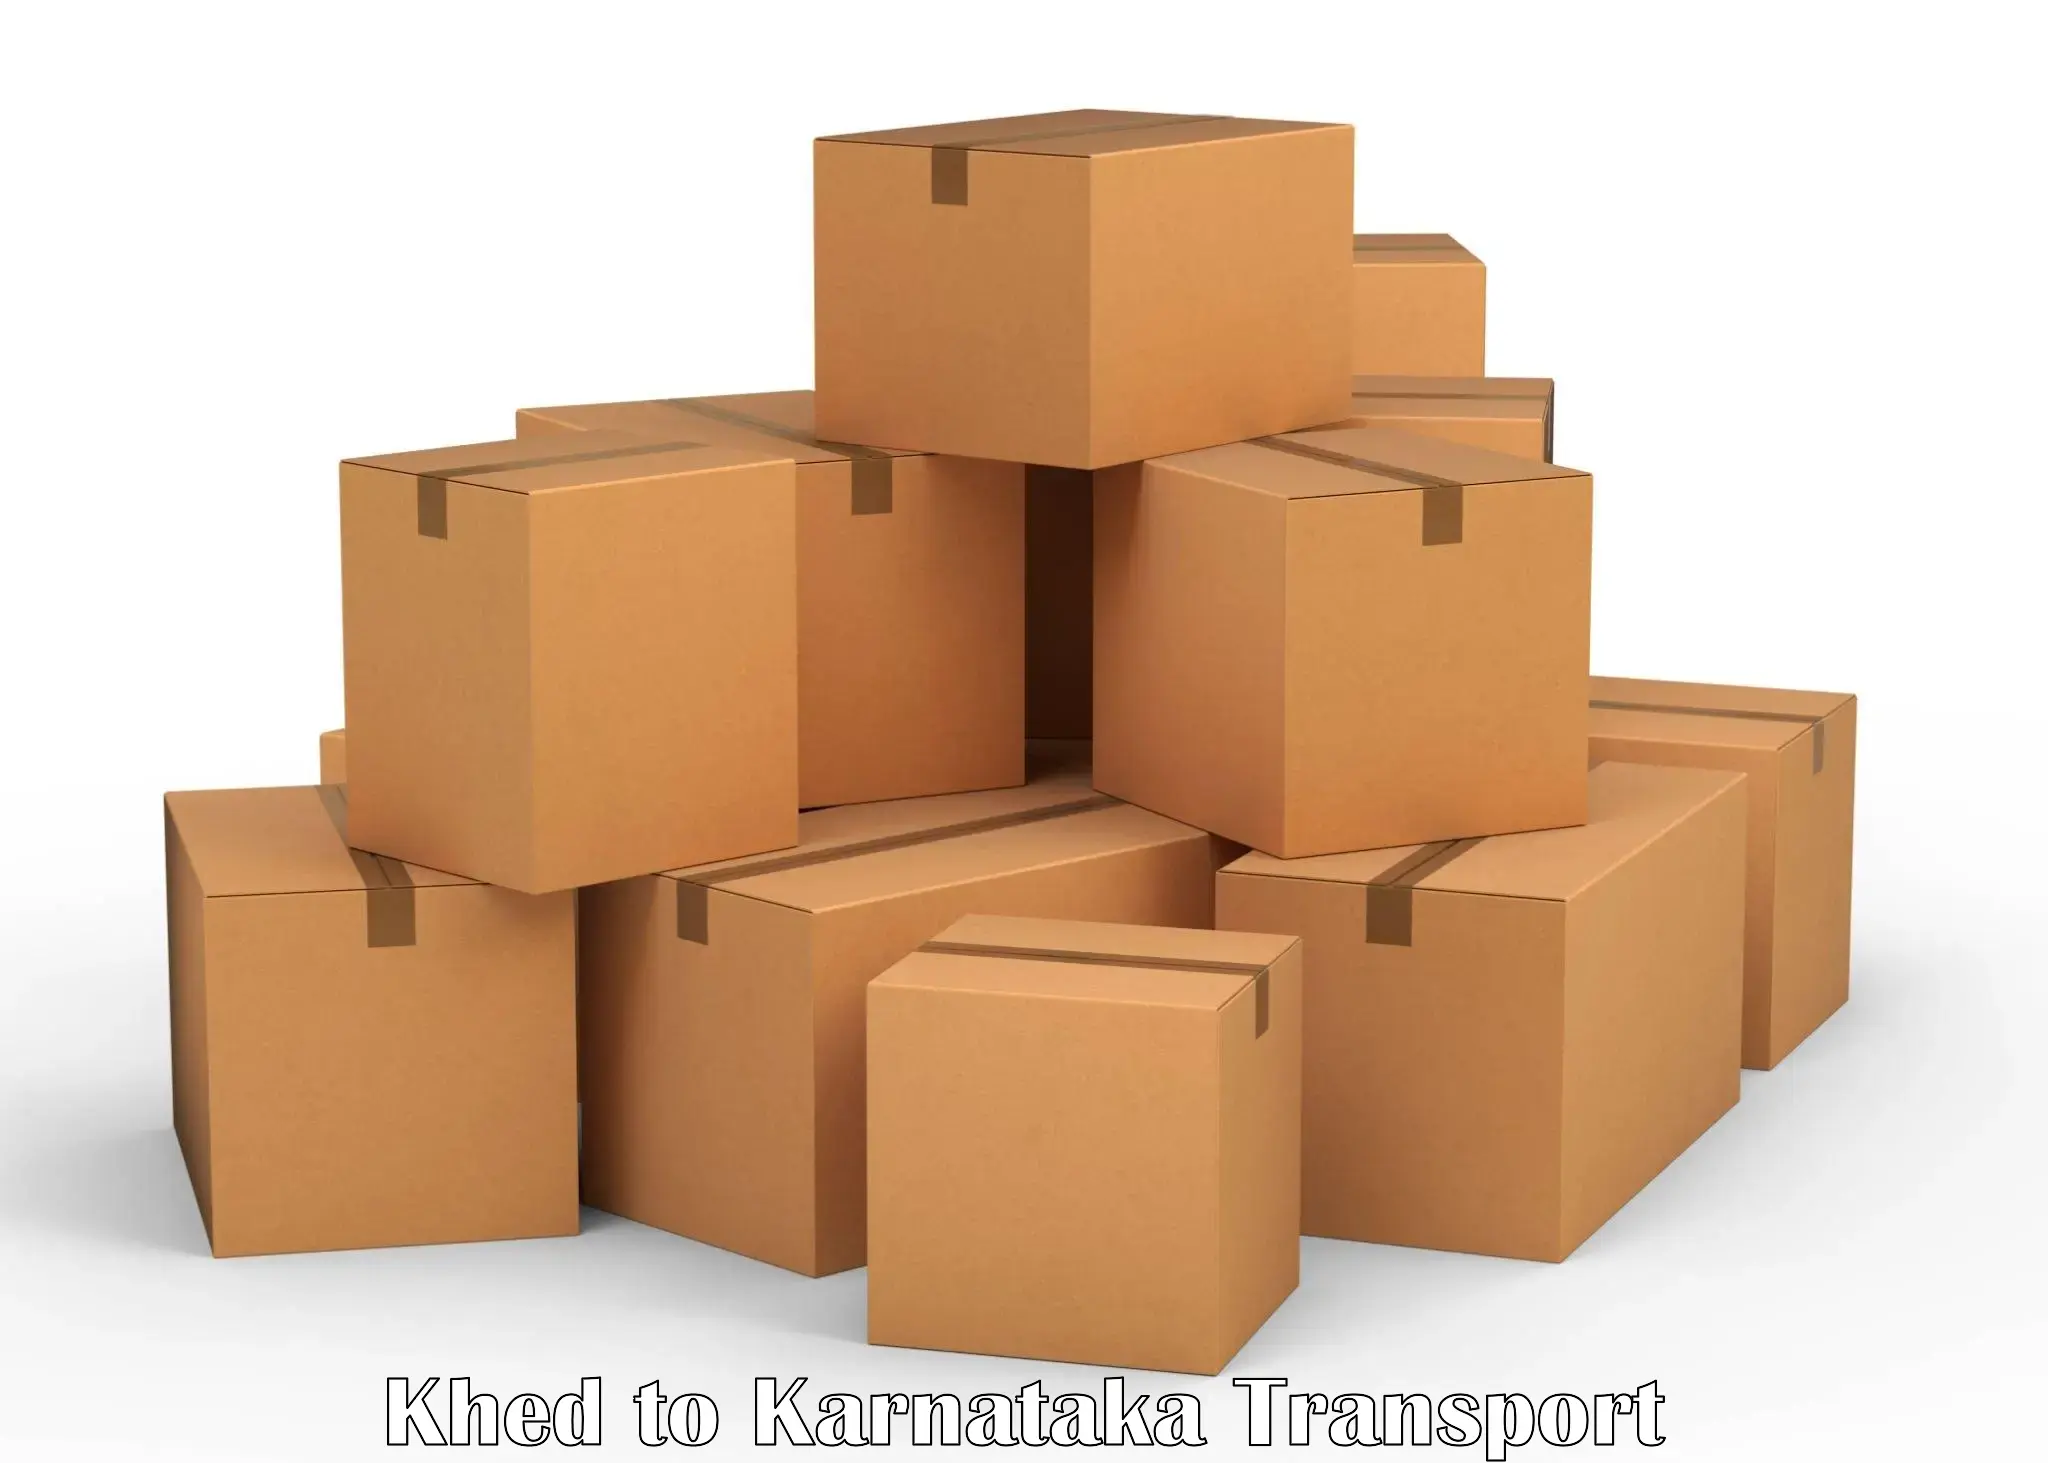 Daily parcel service transport Khed to Ramanagara